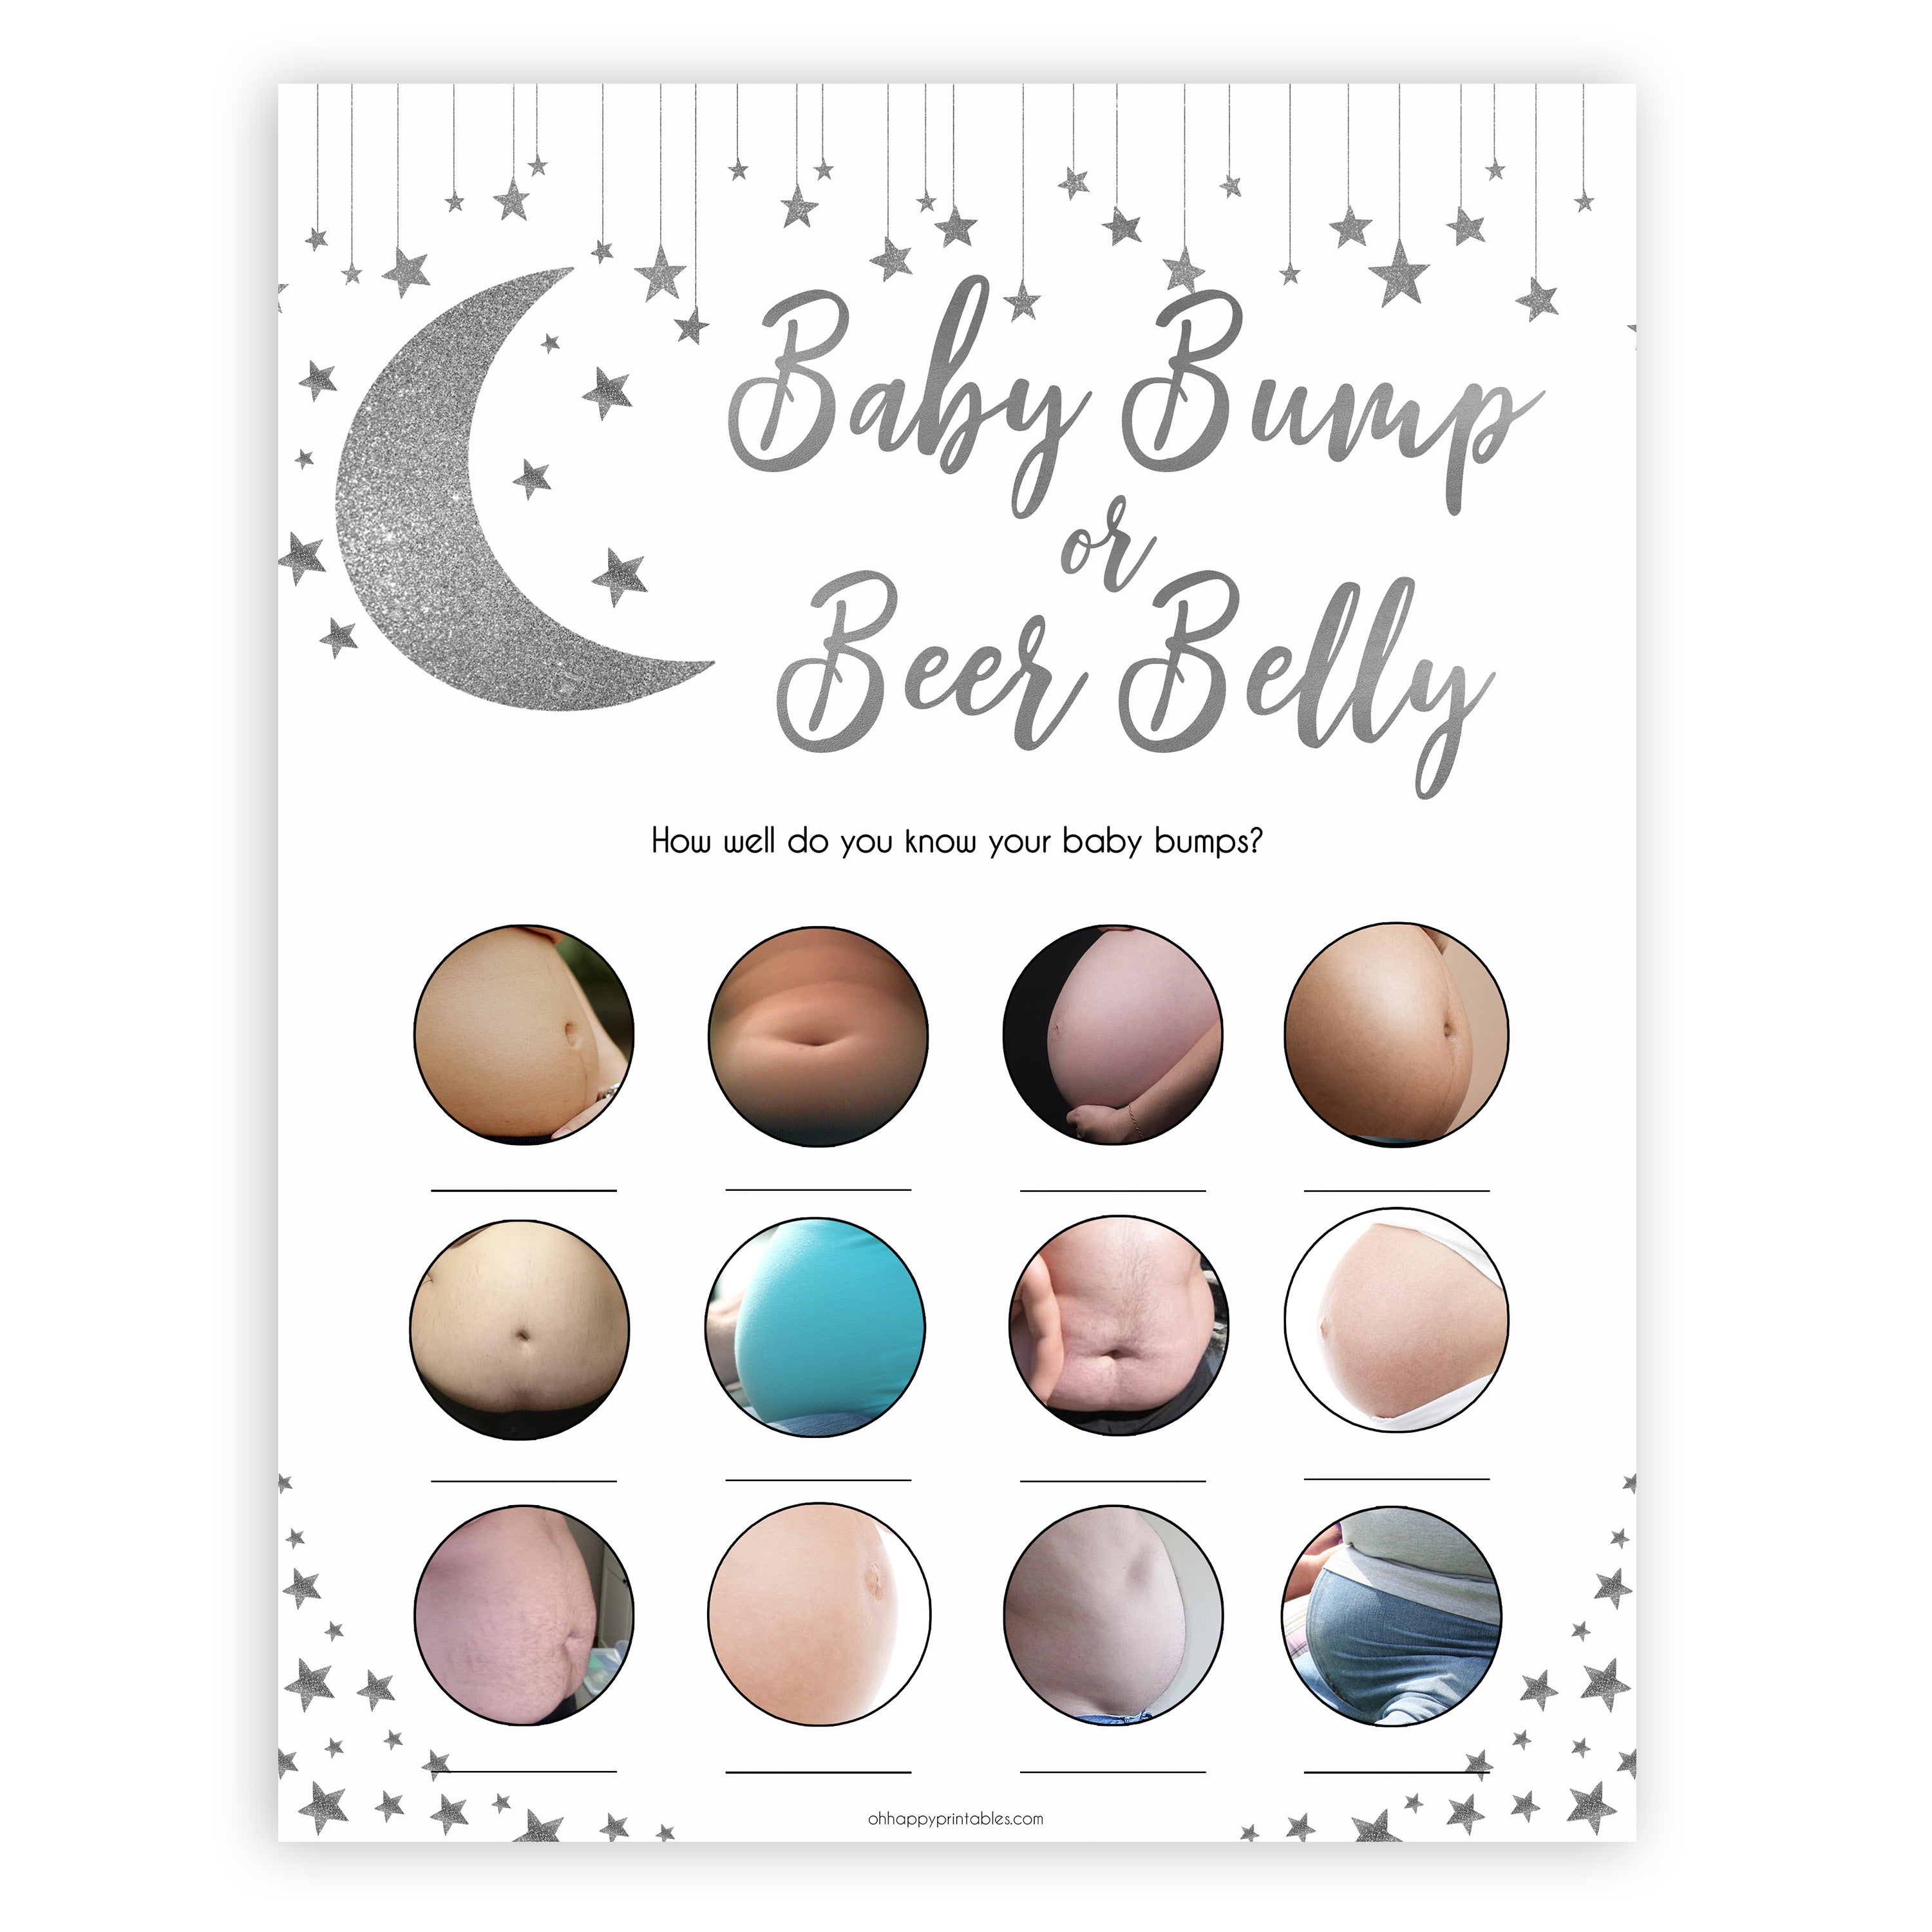 Silver little star, baby bump or beer belly, baby bump game, baby games, baby shower games, printable baby games, fun baby games, twinkle little star games, baby games, fun baby shower ideas, baby shower ideas